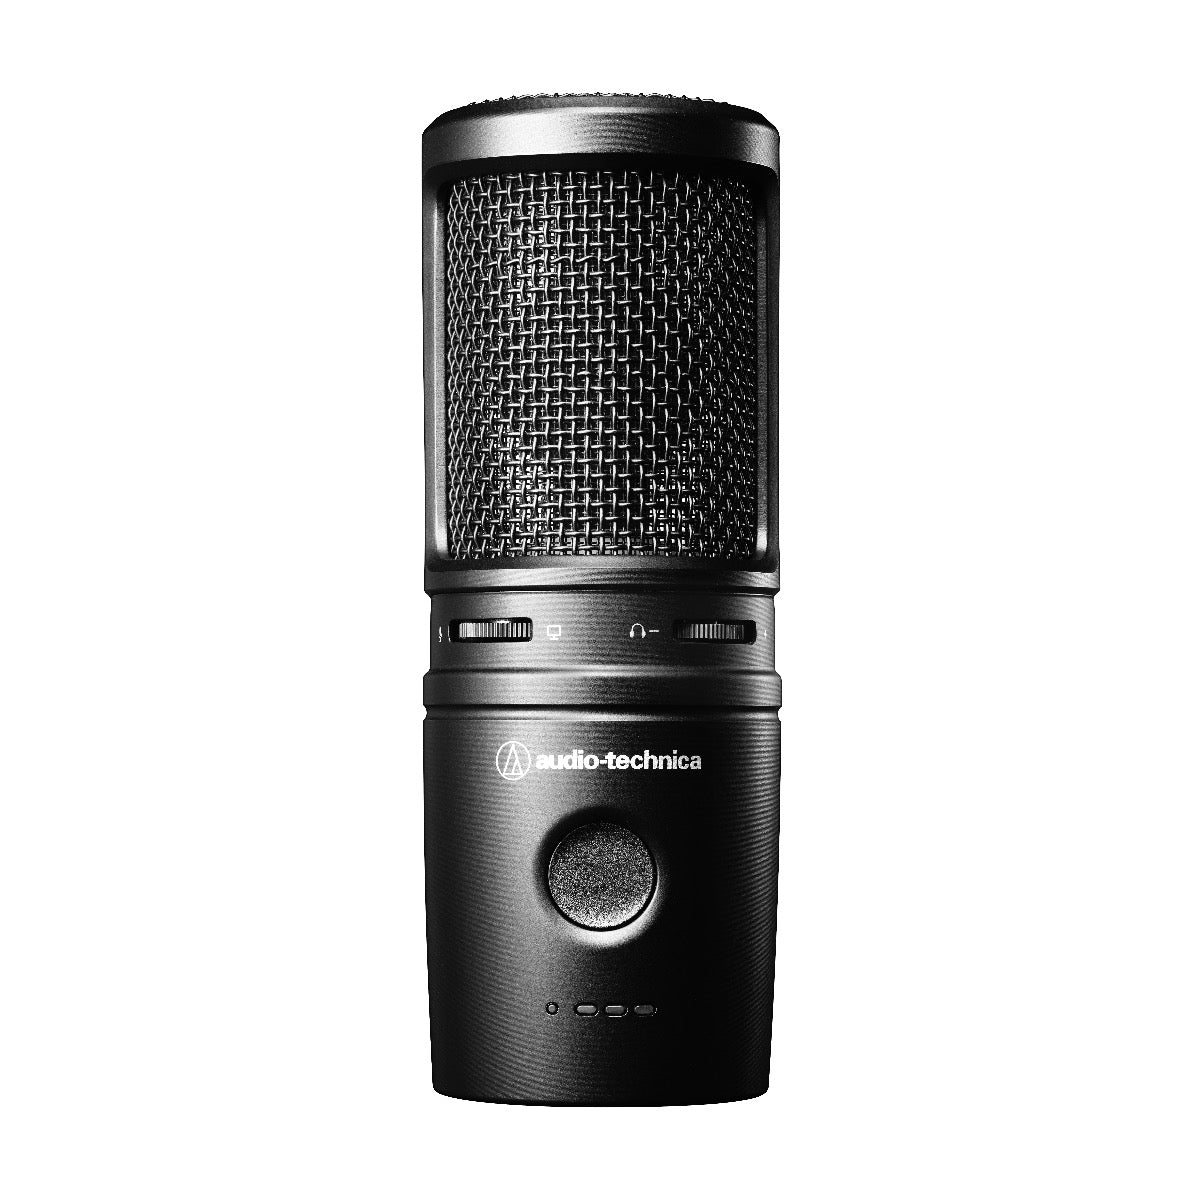 Audio Technica AT2020USBXP USB condenser mic with desktop stand, View 1